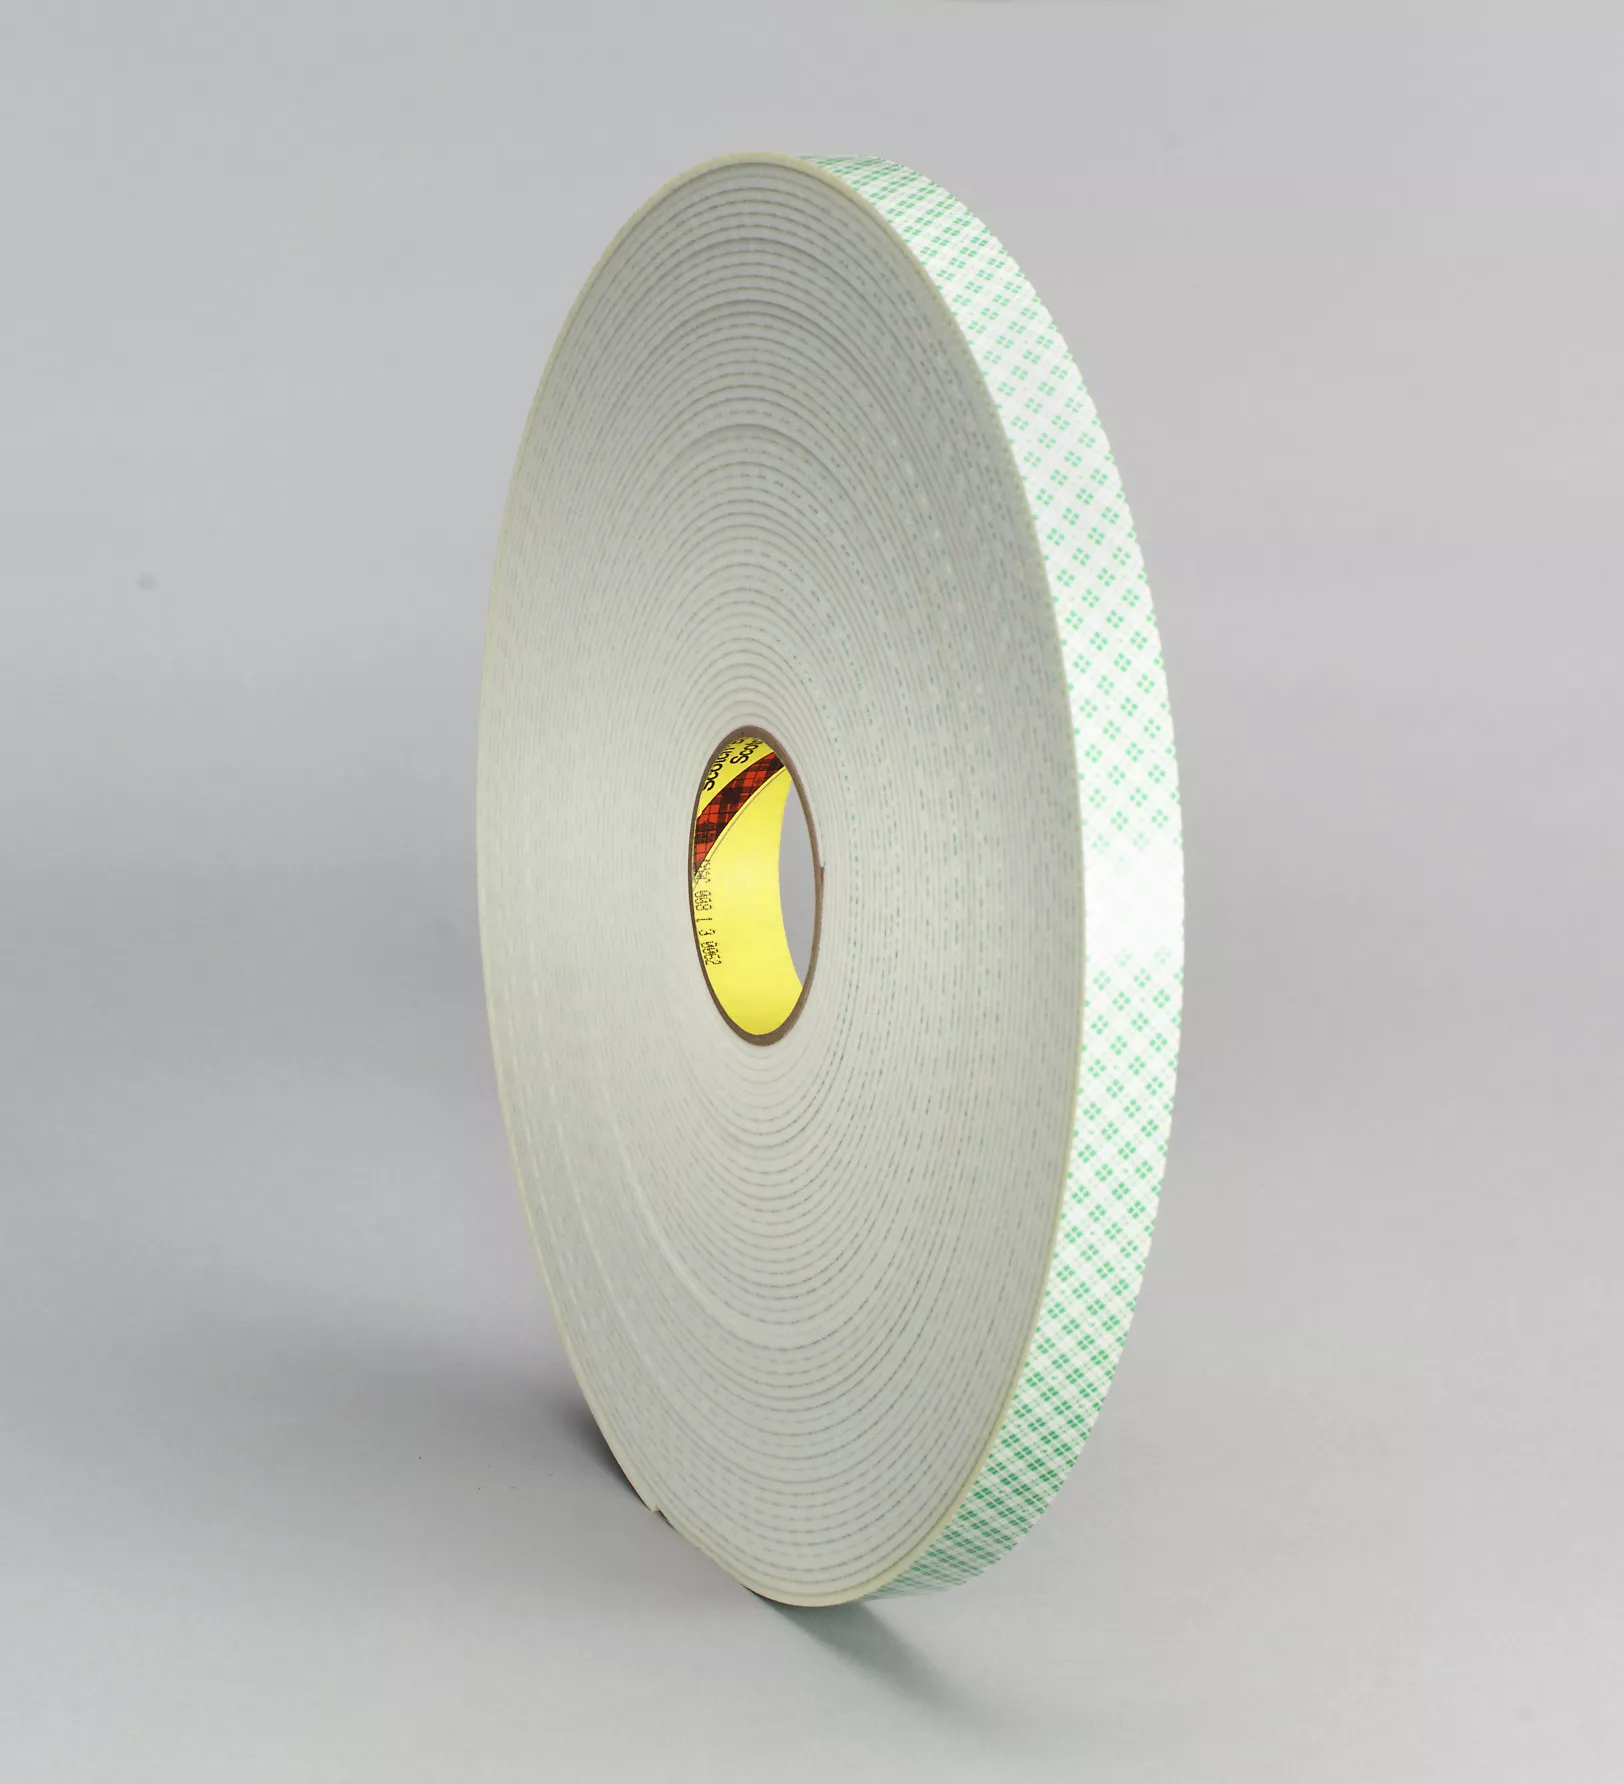 3M™ Double Coated Urethane Foam Tape 4008, Off White, 15 in x 36 yd, 125
mil, 1 Roll/Case